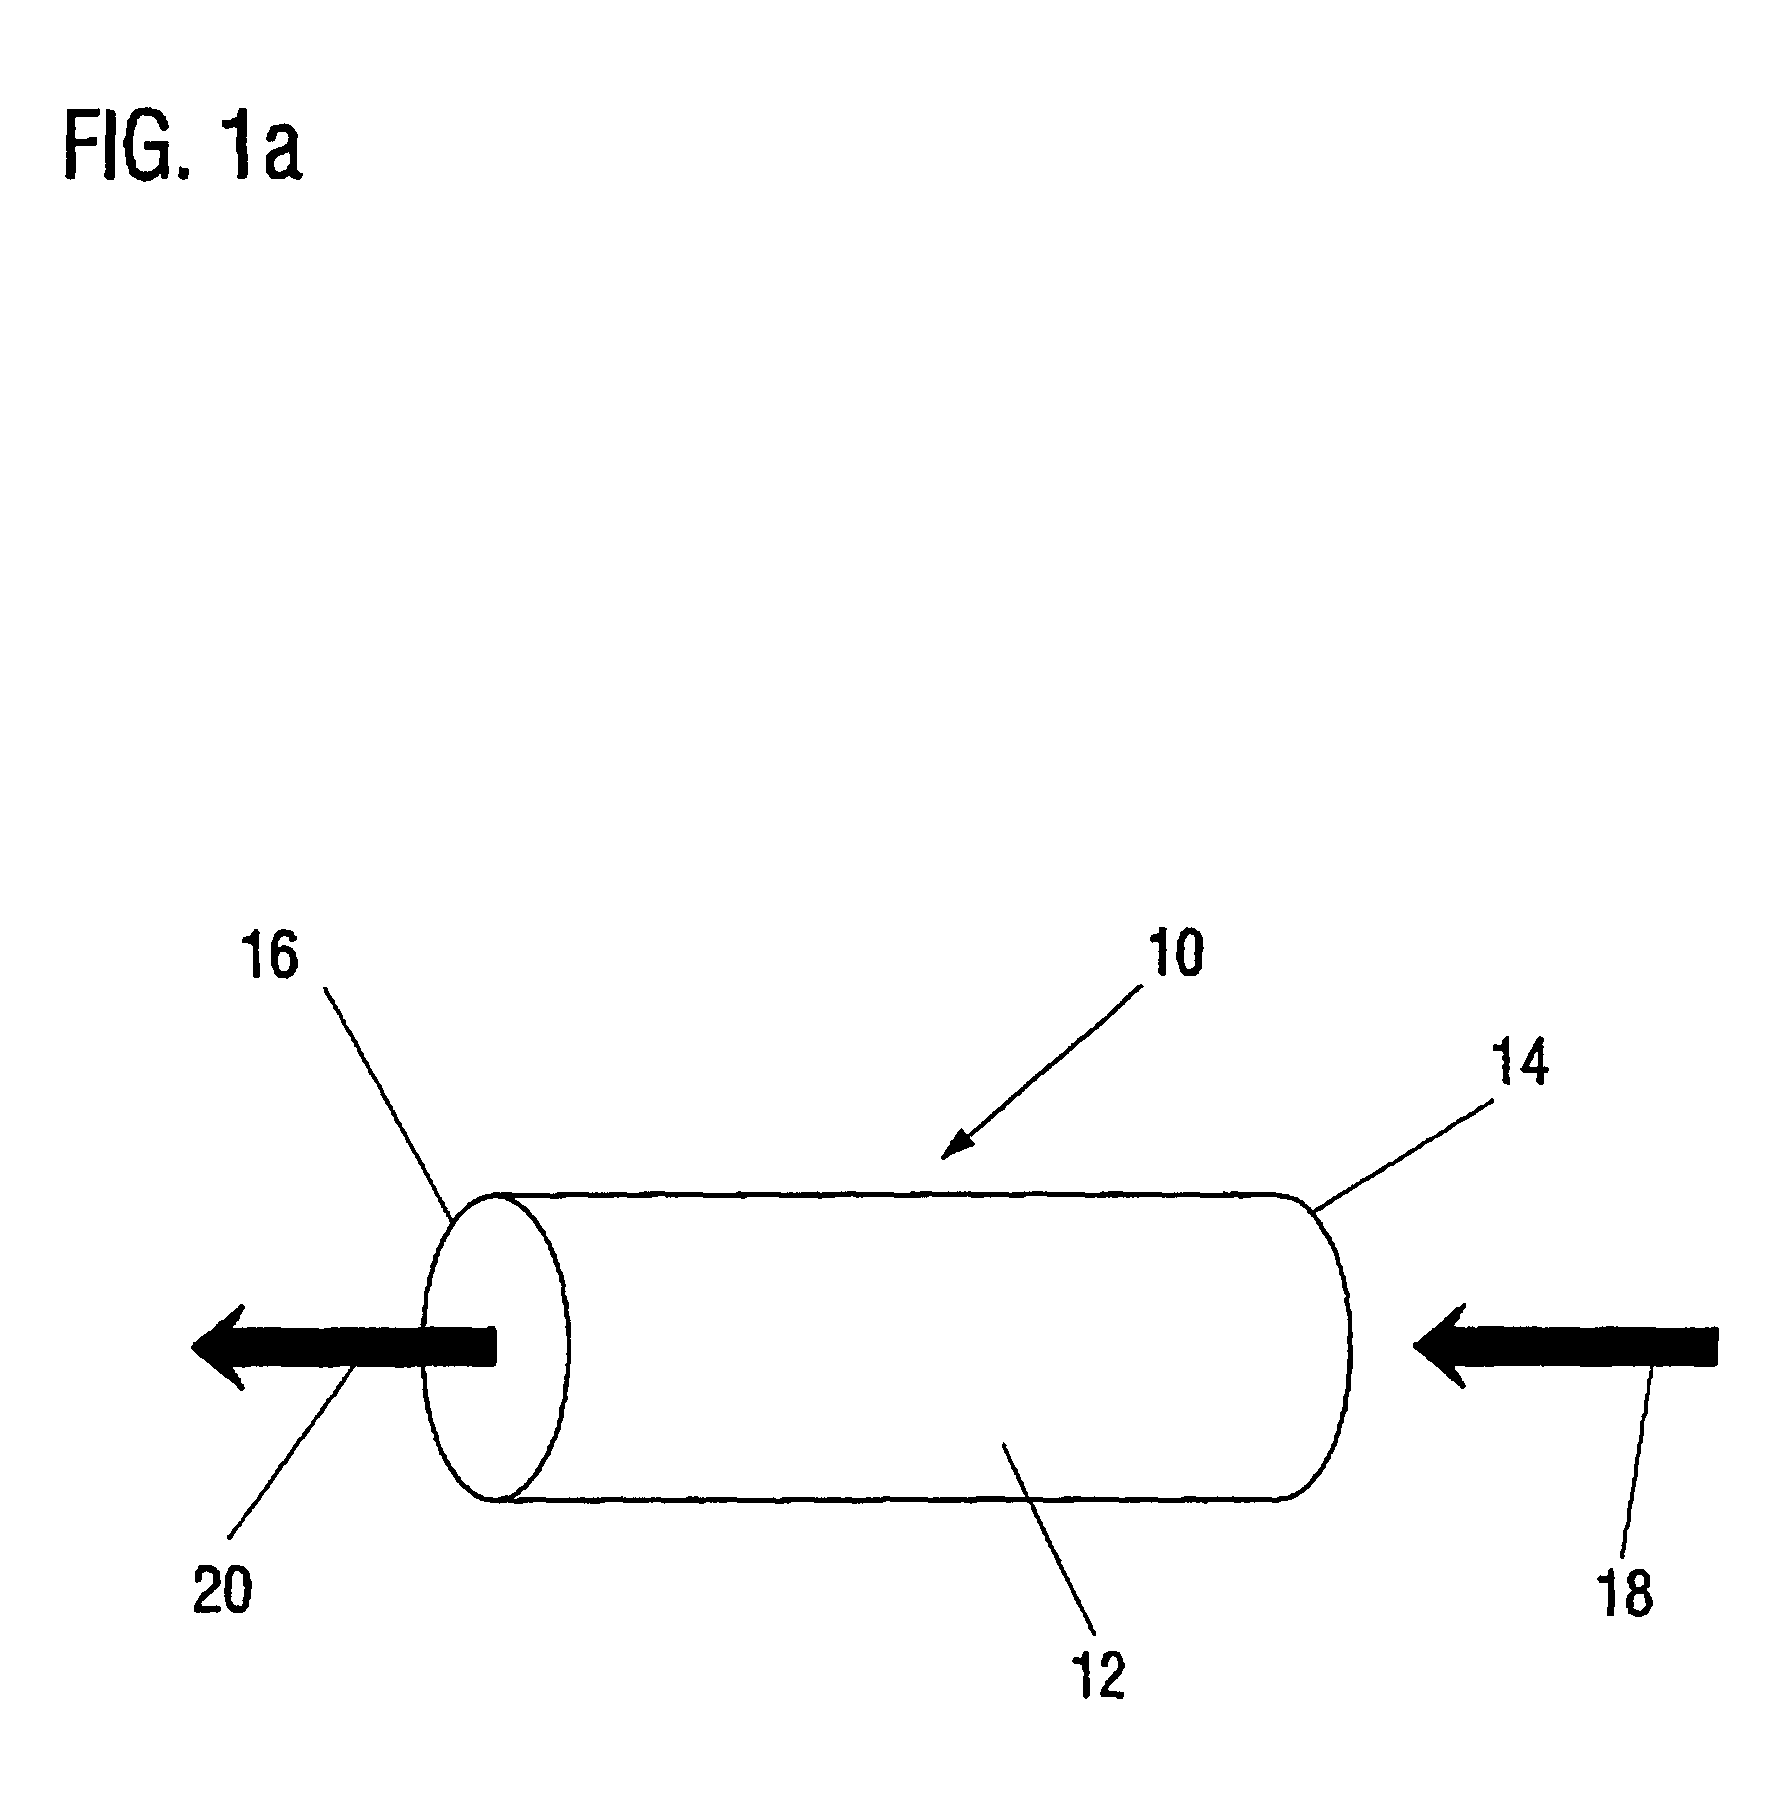 Implant for releasing an active substance into a vessel through which a body medium flows